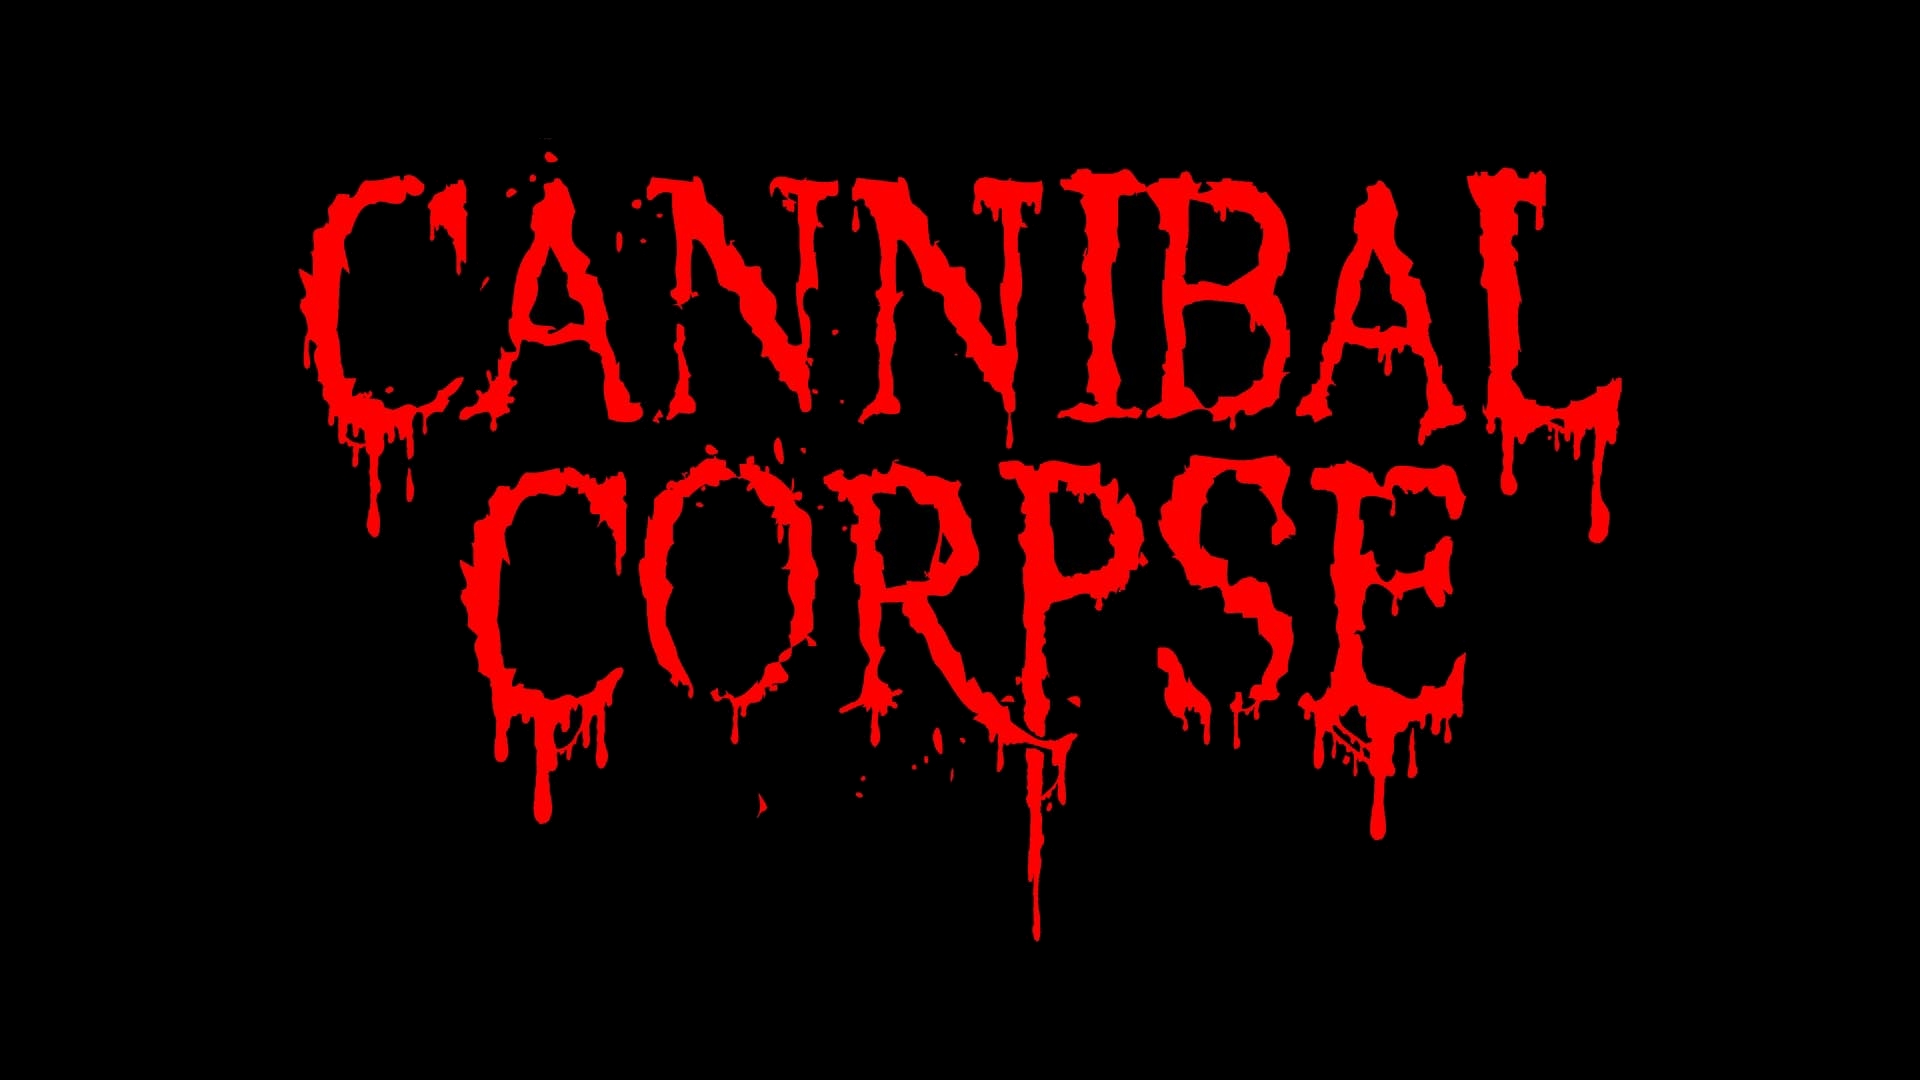 music, cannibal corpse High Definition image